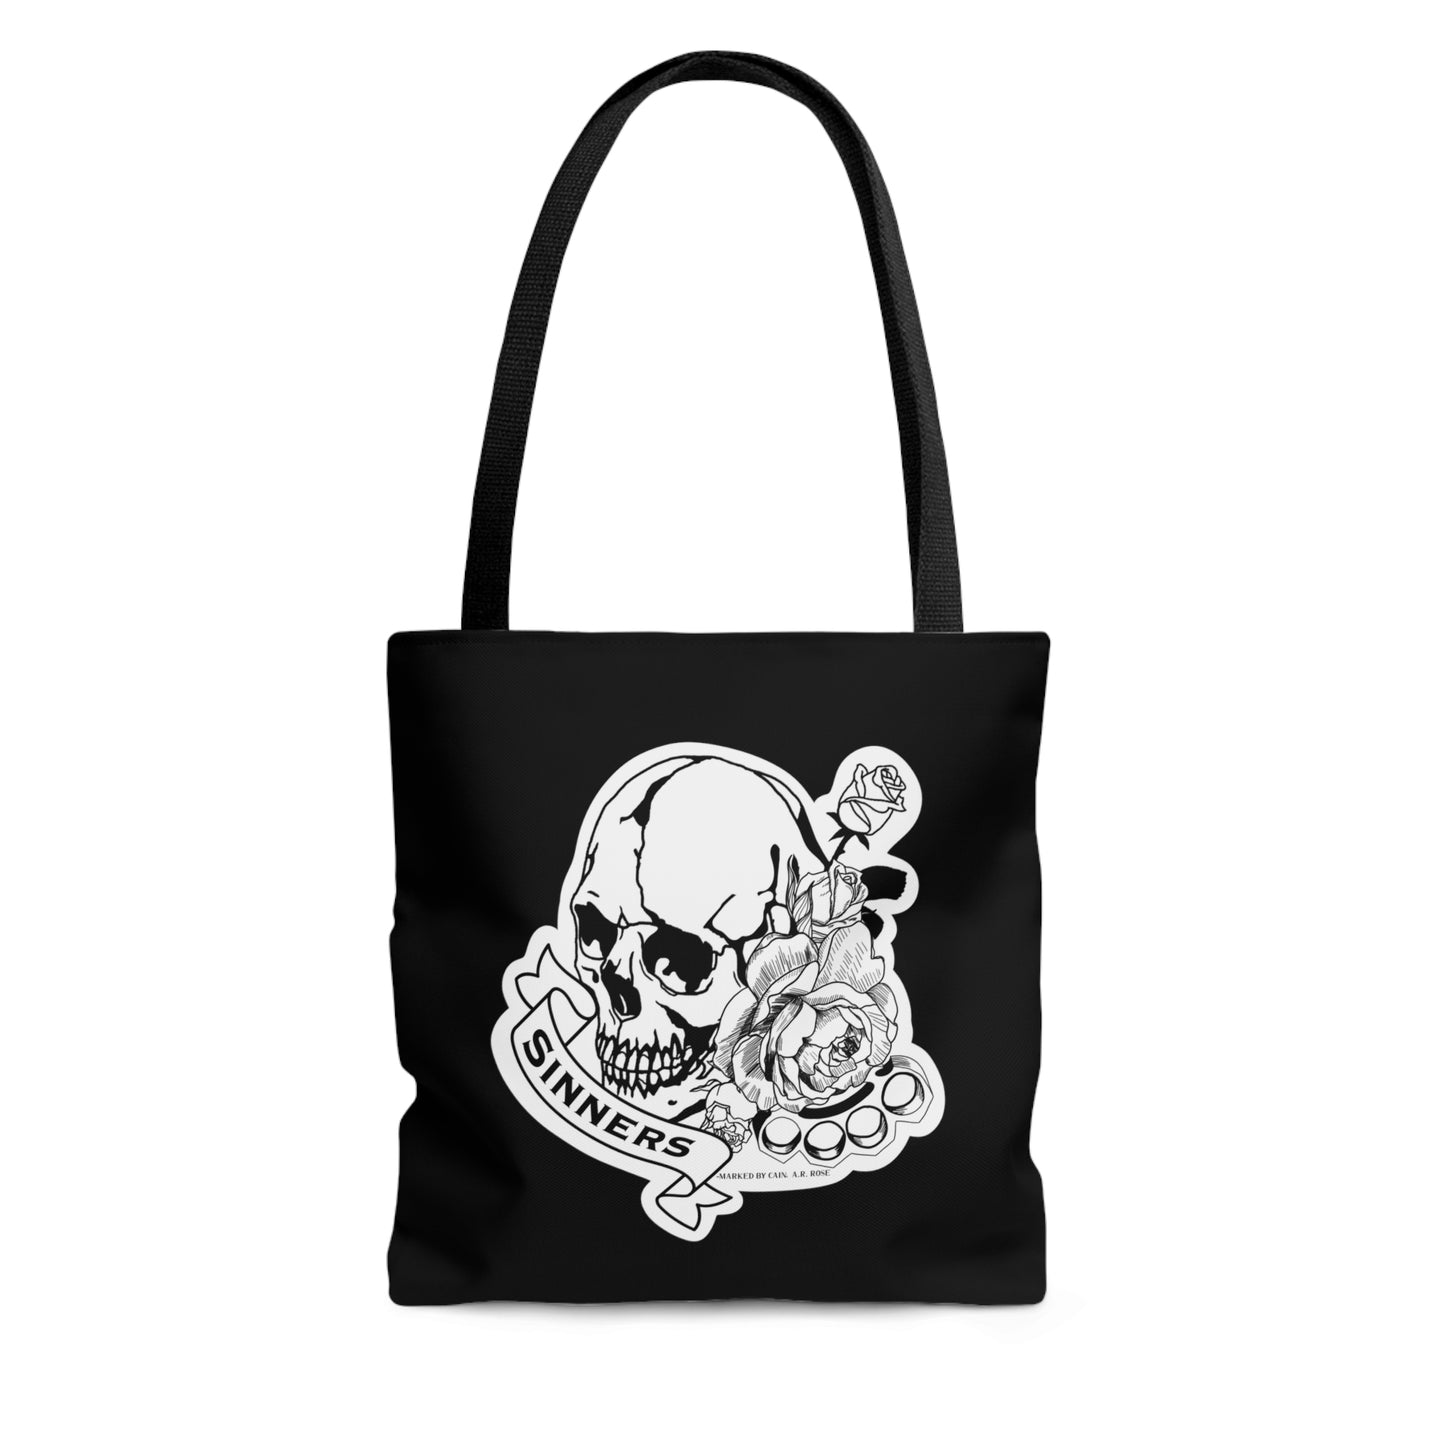 Marked by Cain - Licensed Tote Bag